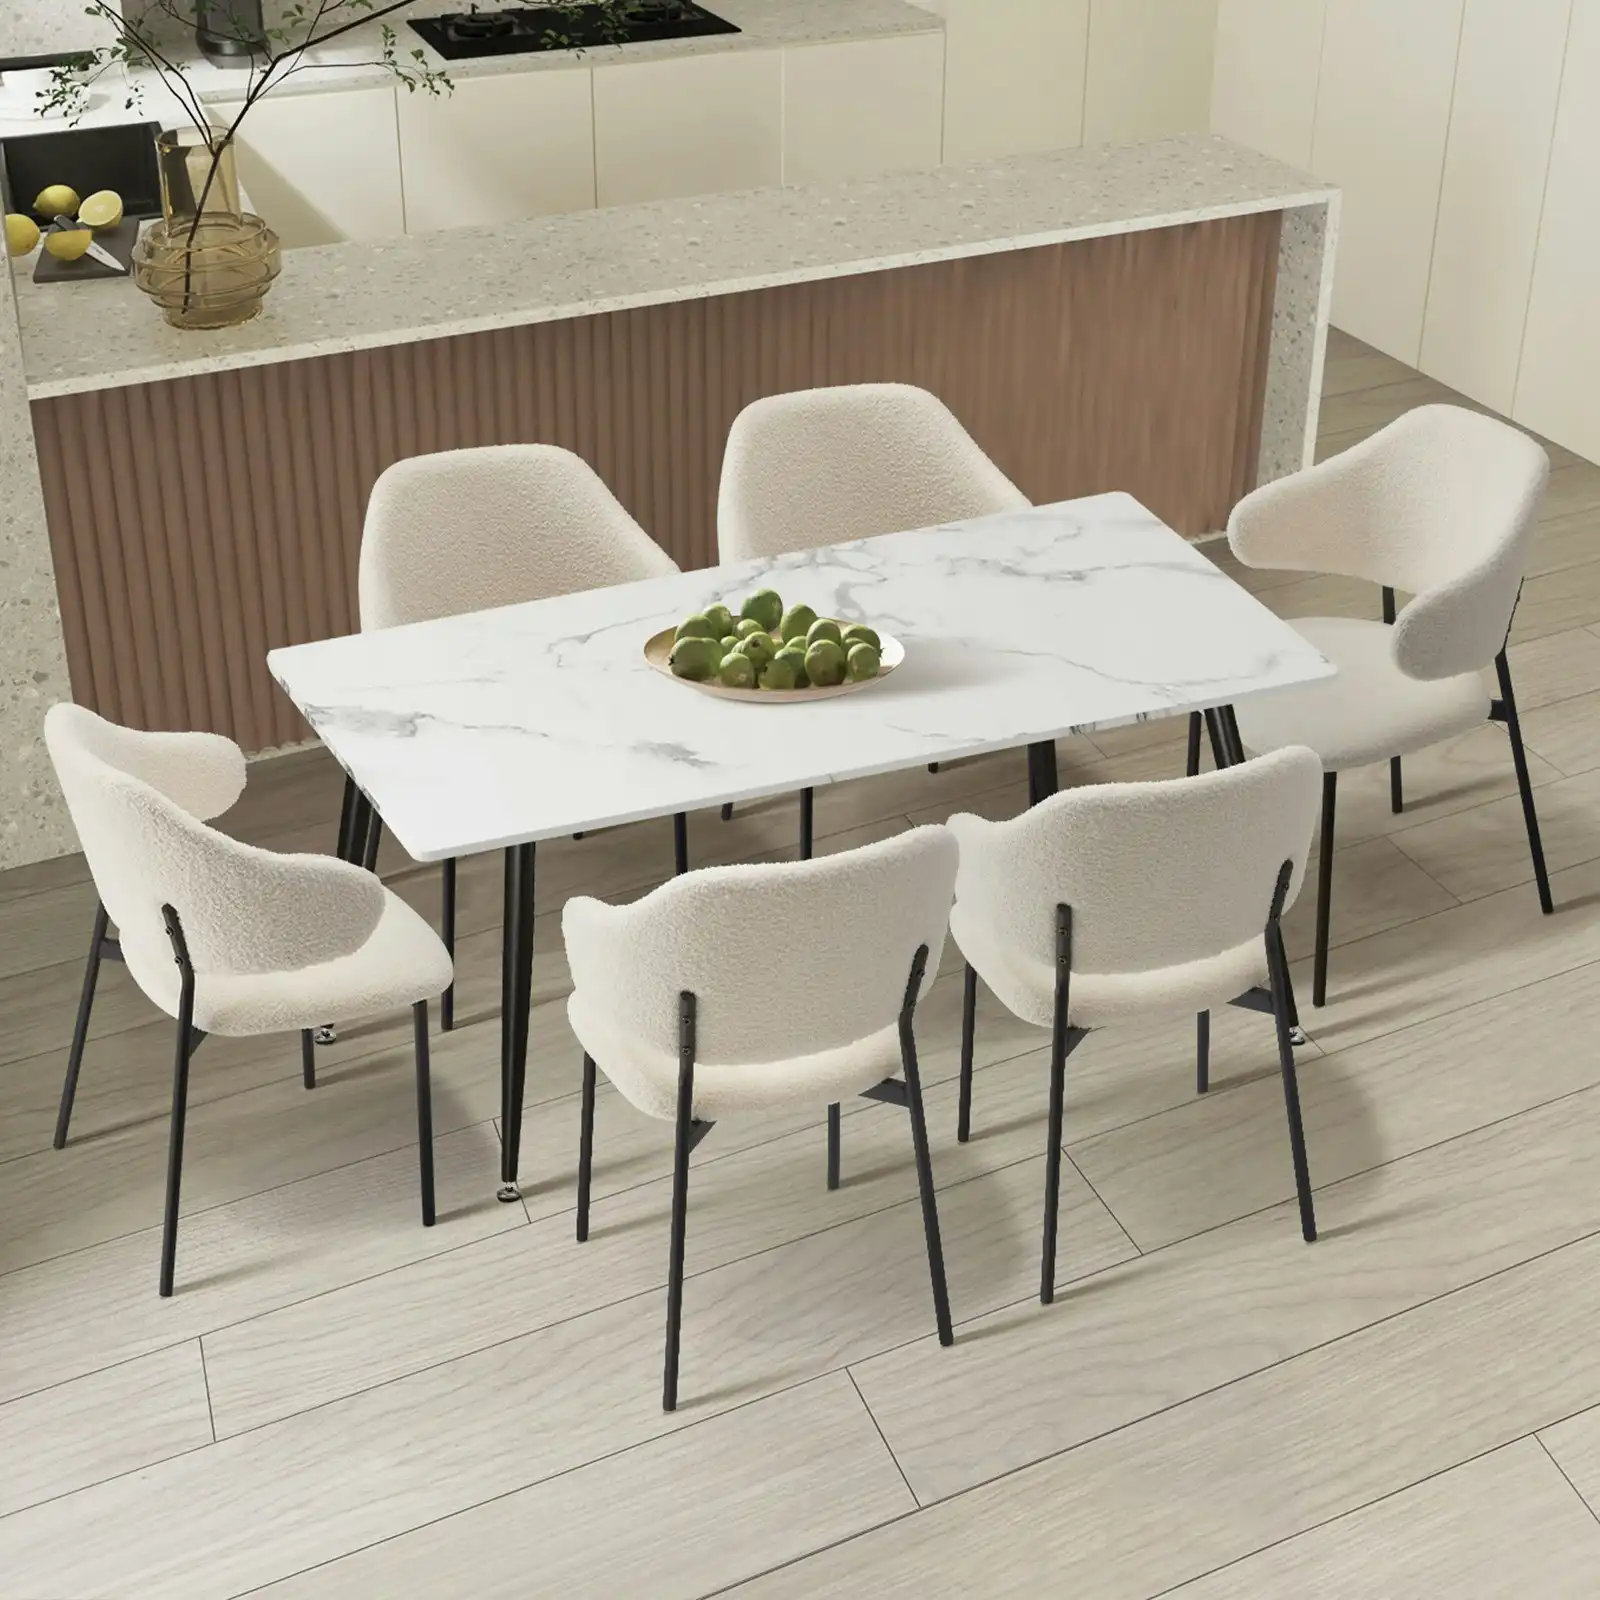 Oikiture 7PCS Dining sets 120cm Rectangle Table with Chairs Sherpa-White